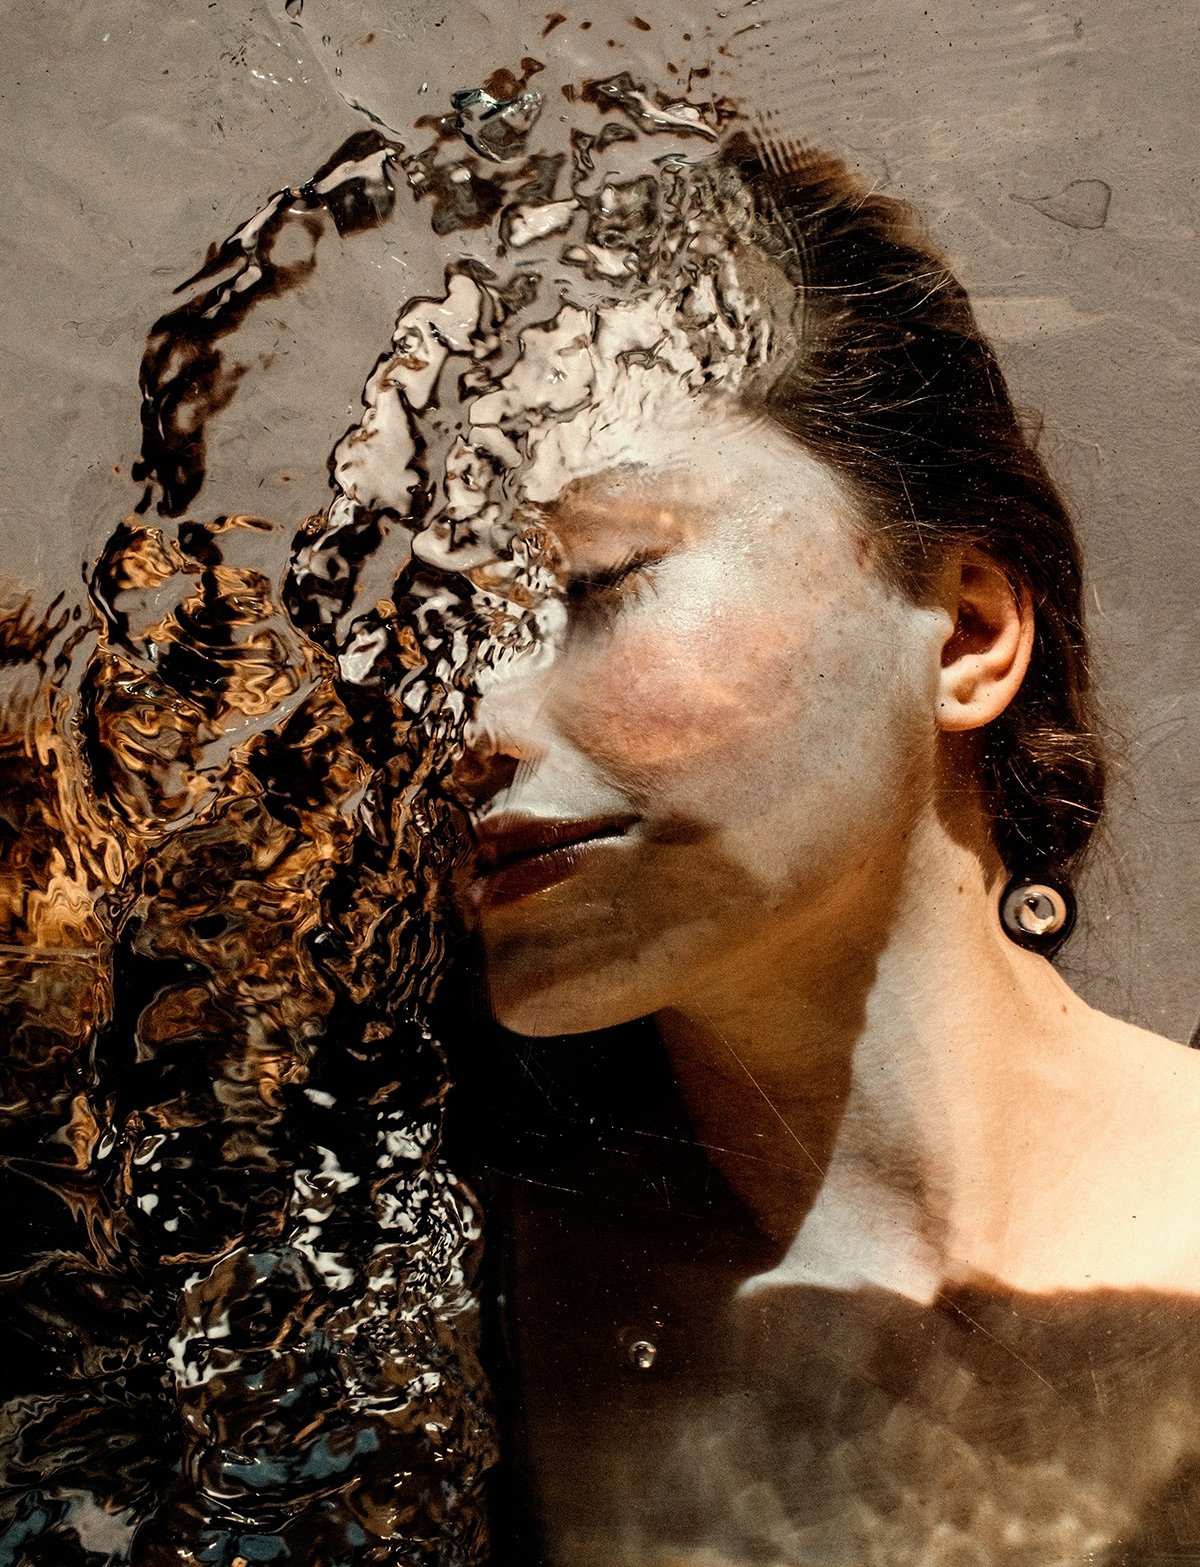 Marta Syrko Uses Water and Glass for Creative Portrait Photography